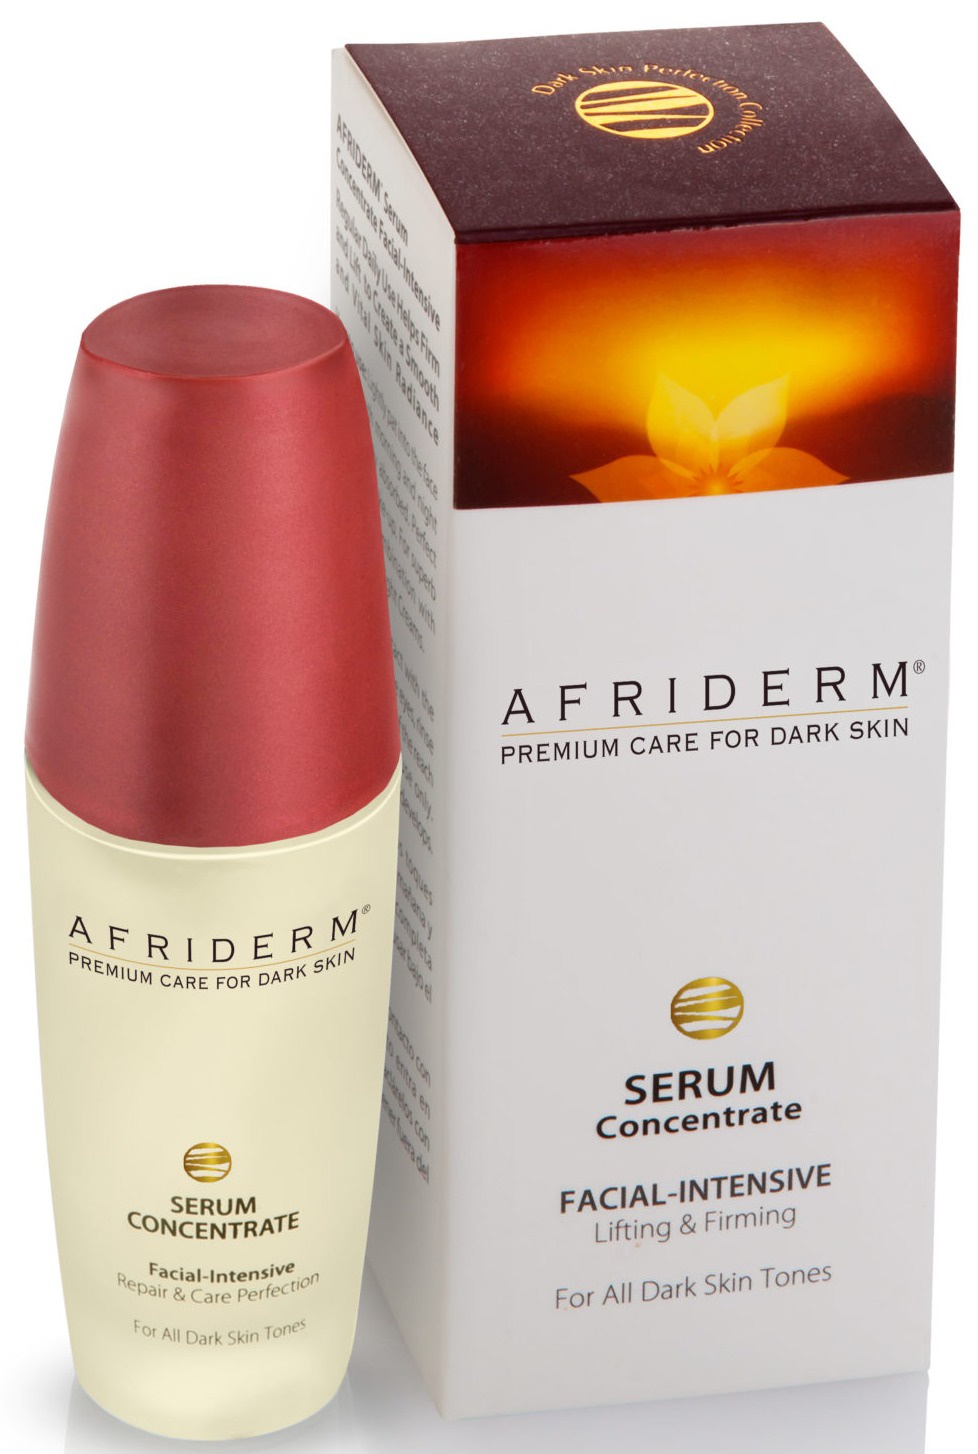 Afriderm Serum Concentrate Facial Intensive